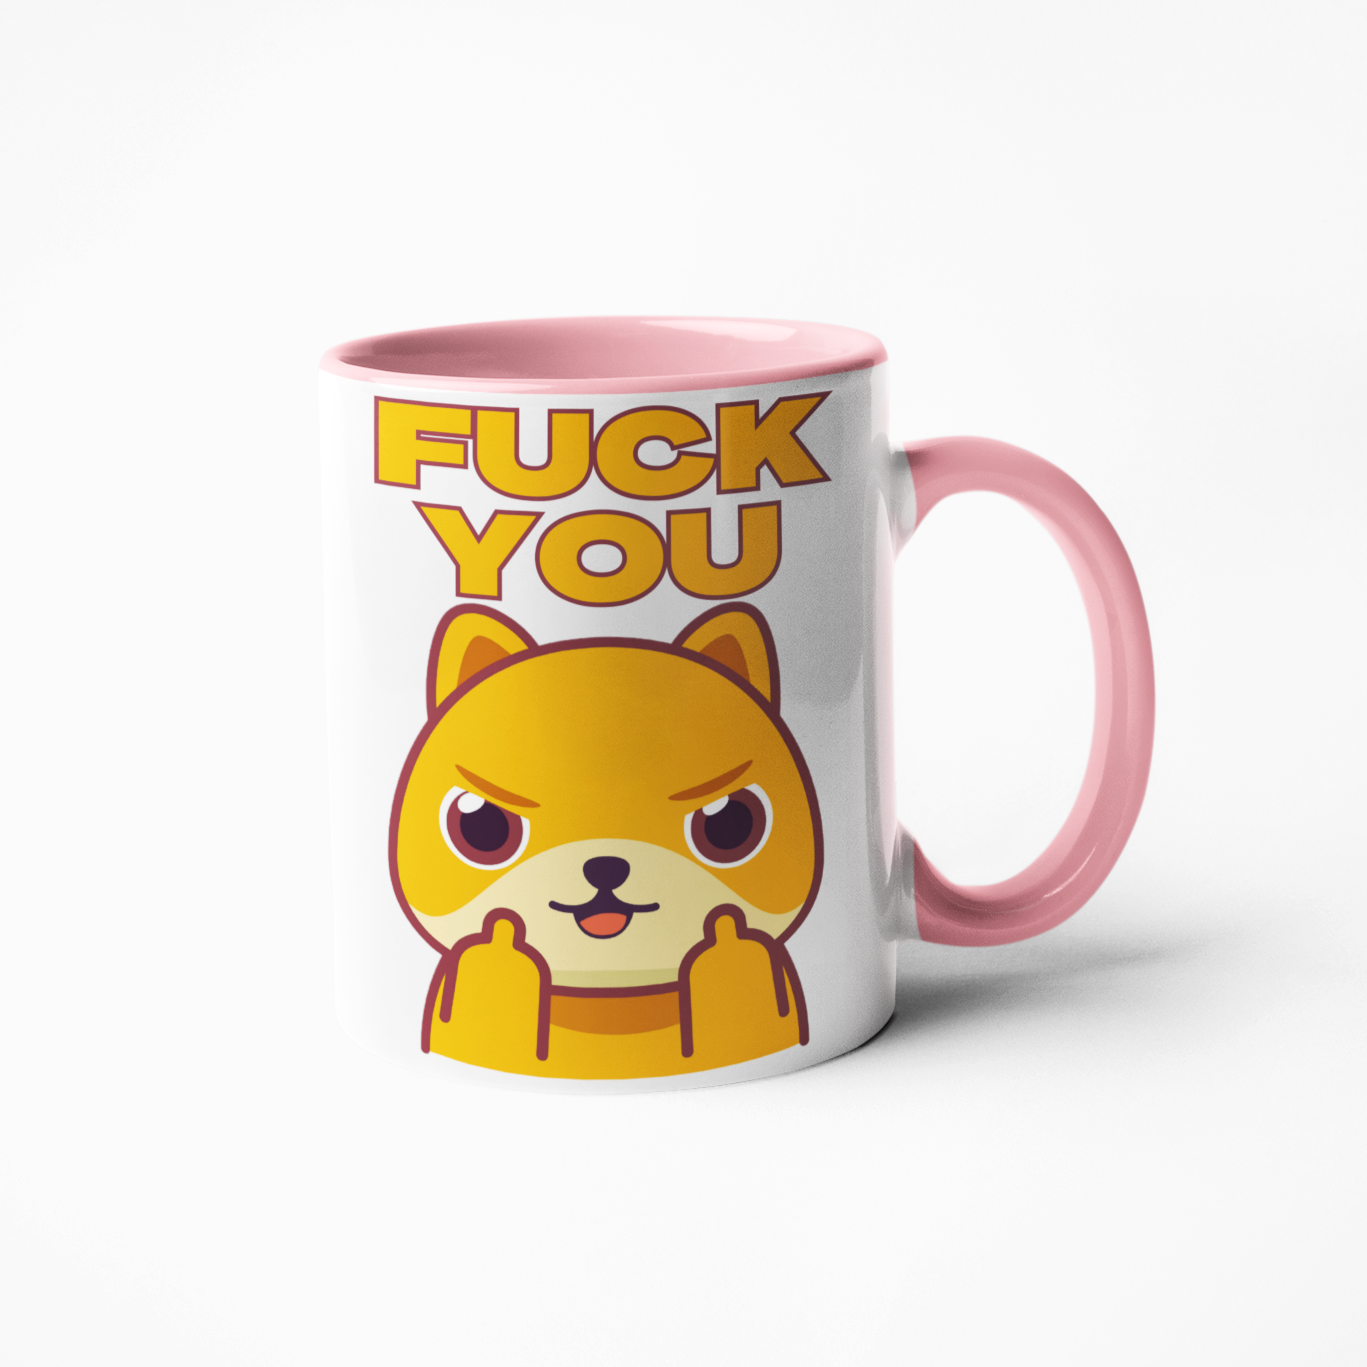 Fuel your rebellious spirit with this classic Fuck you middle finger swearing fox funny coffee mug! Invoke your wilder side and challenge convention with this daring piece. Let your mug be your statement of nonconformity and boldness! Live loud and wild!